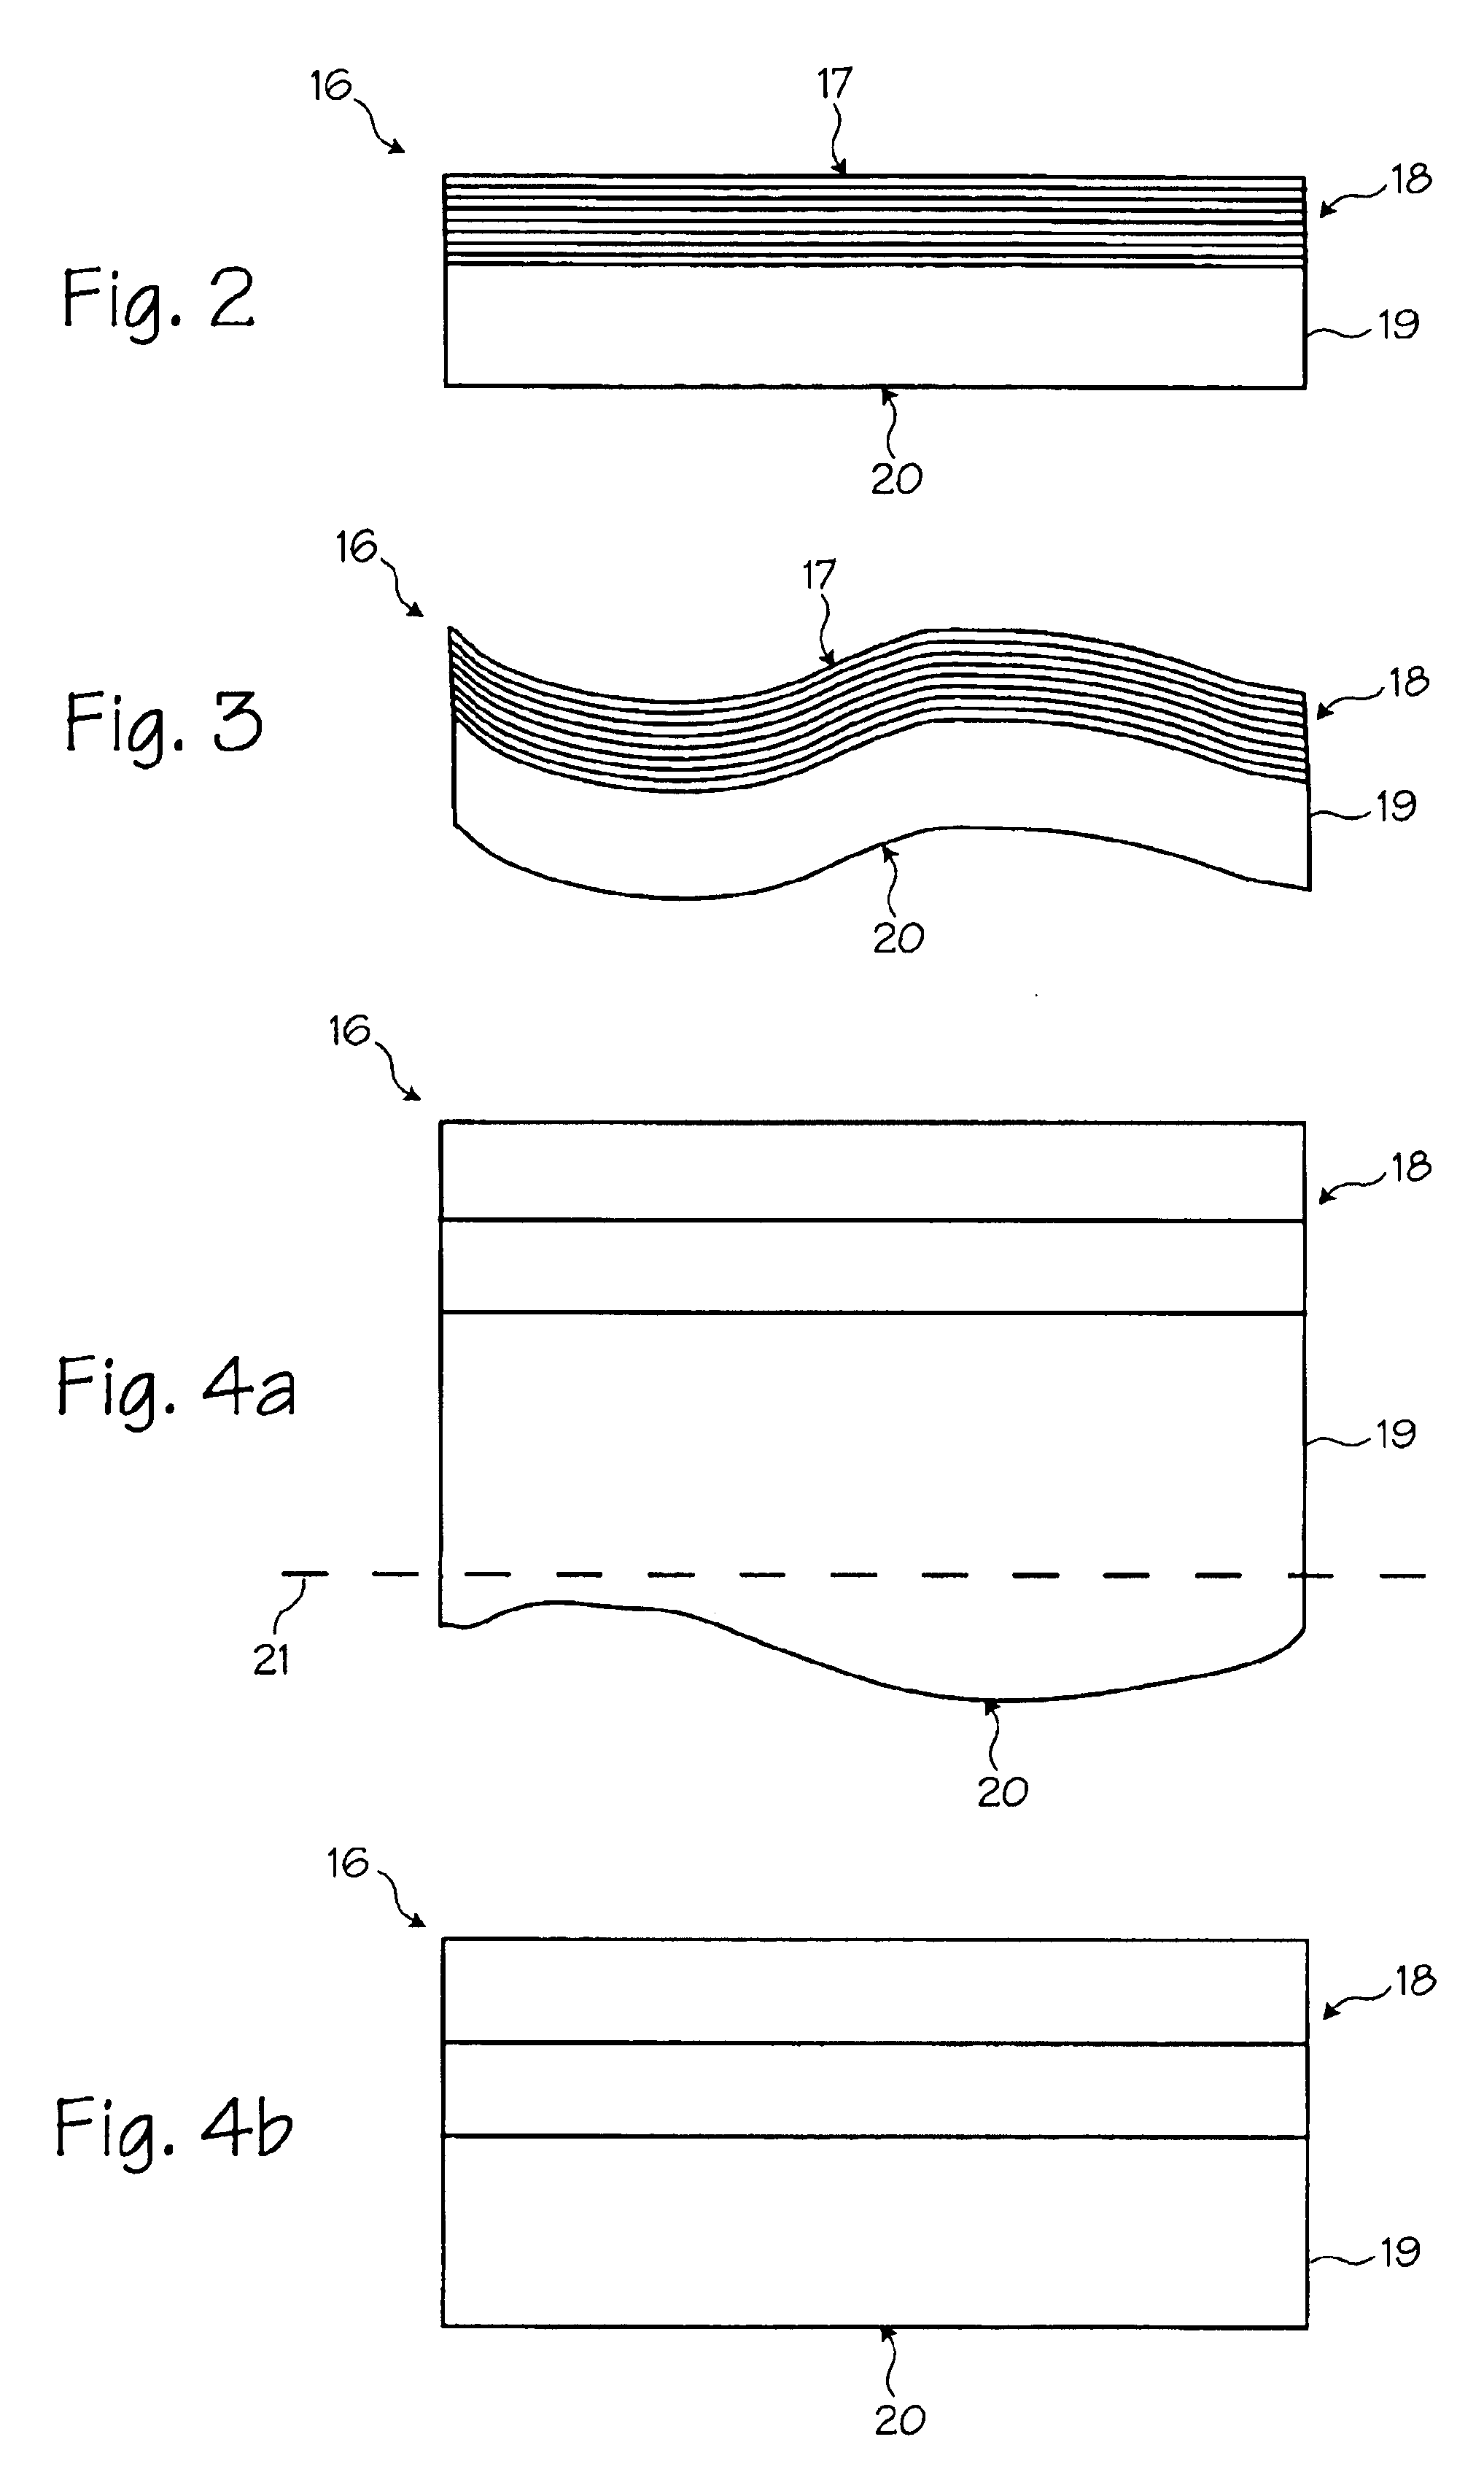 Method of spin etching wafers with an alkali solution